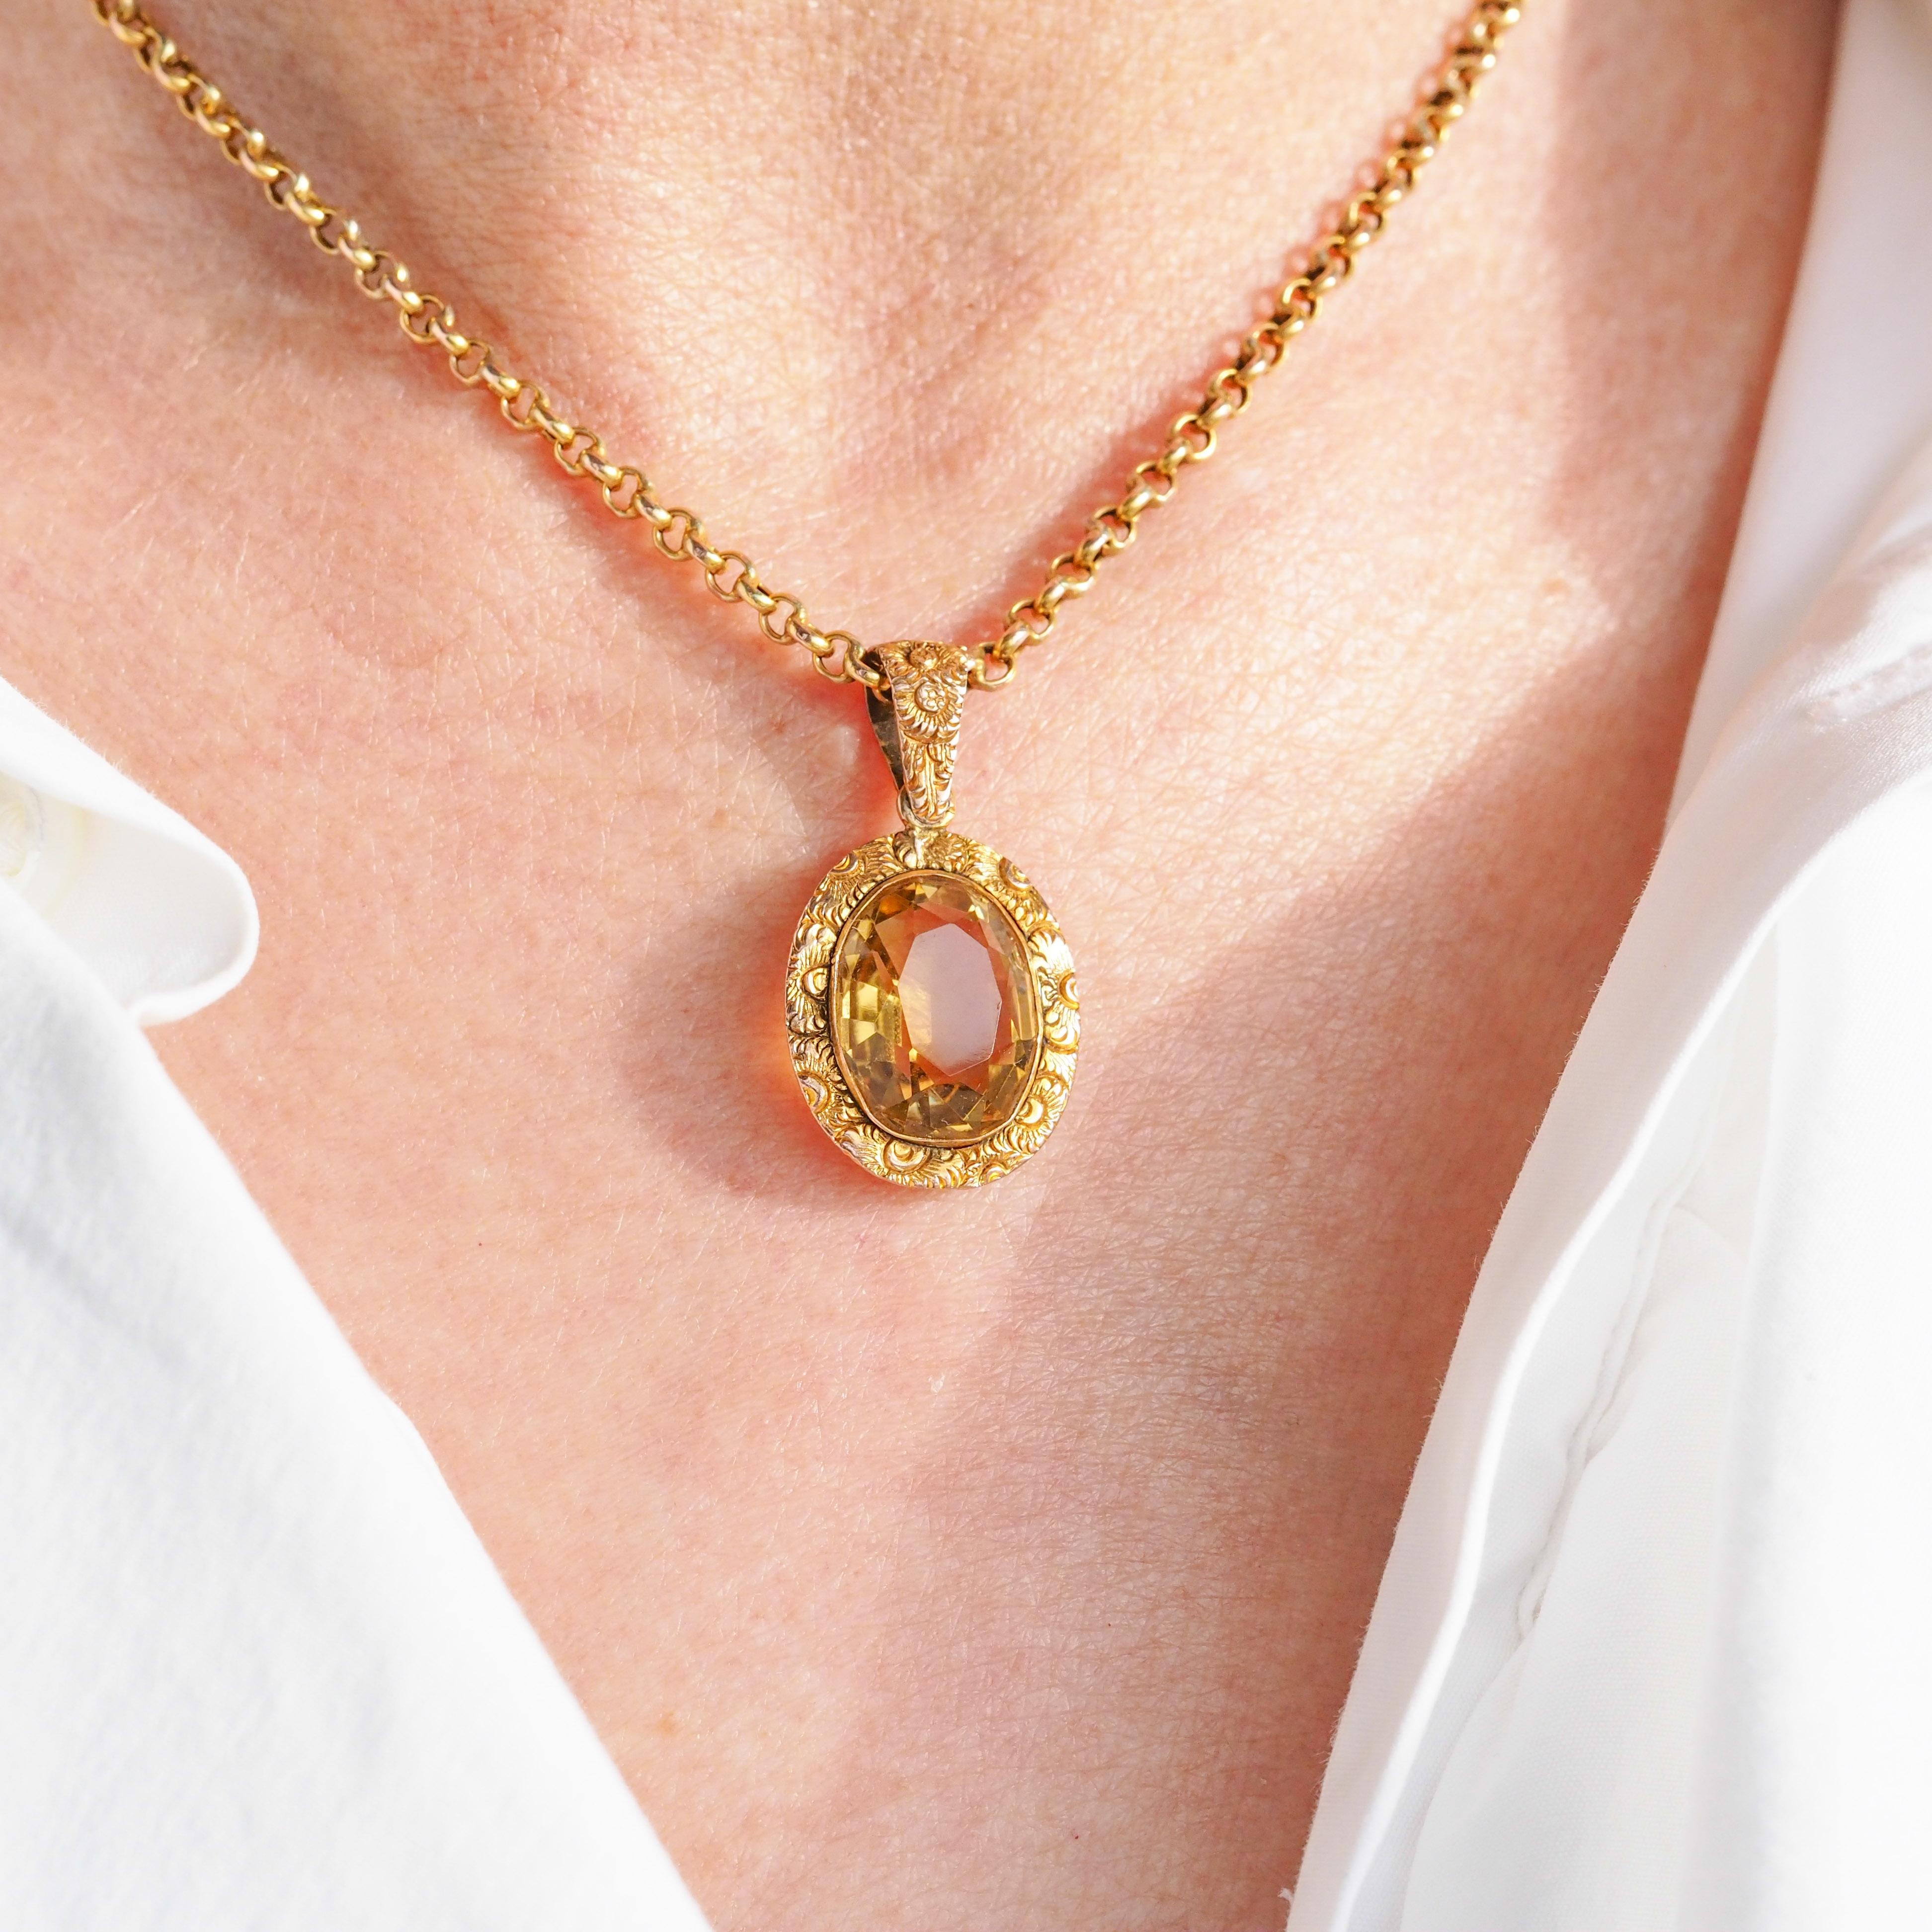 Antique Victorian Citrine Necklace with Chased Floral Pendant 9K Gold c.1850 4